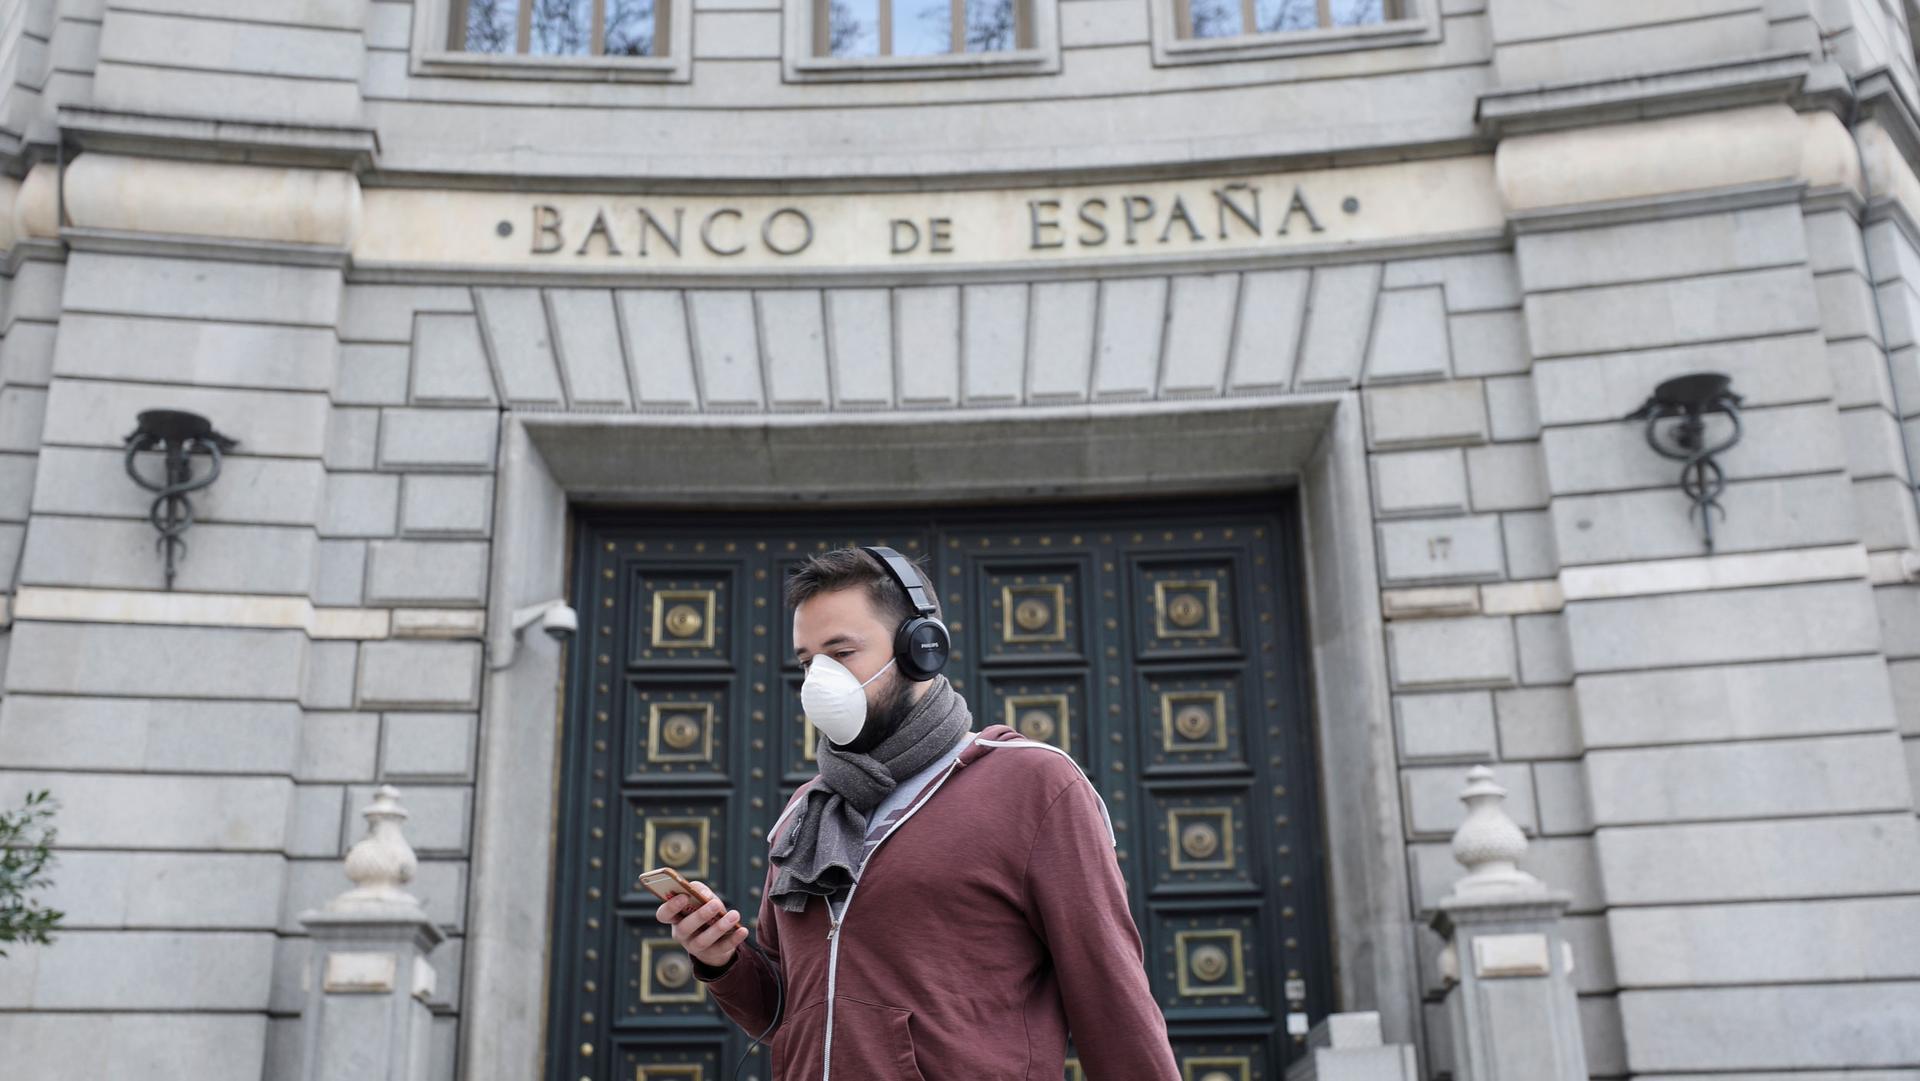 A man is shown wearing a medical face mask and large headphones while looking at a mobile phone.